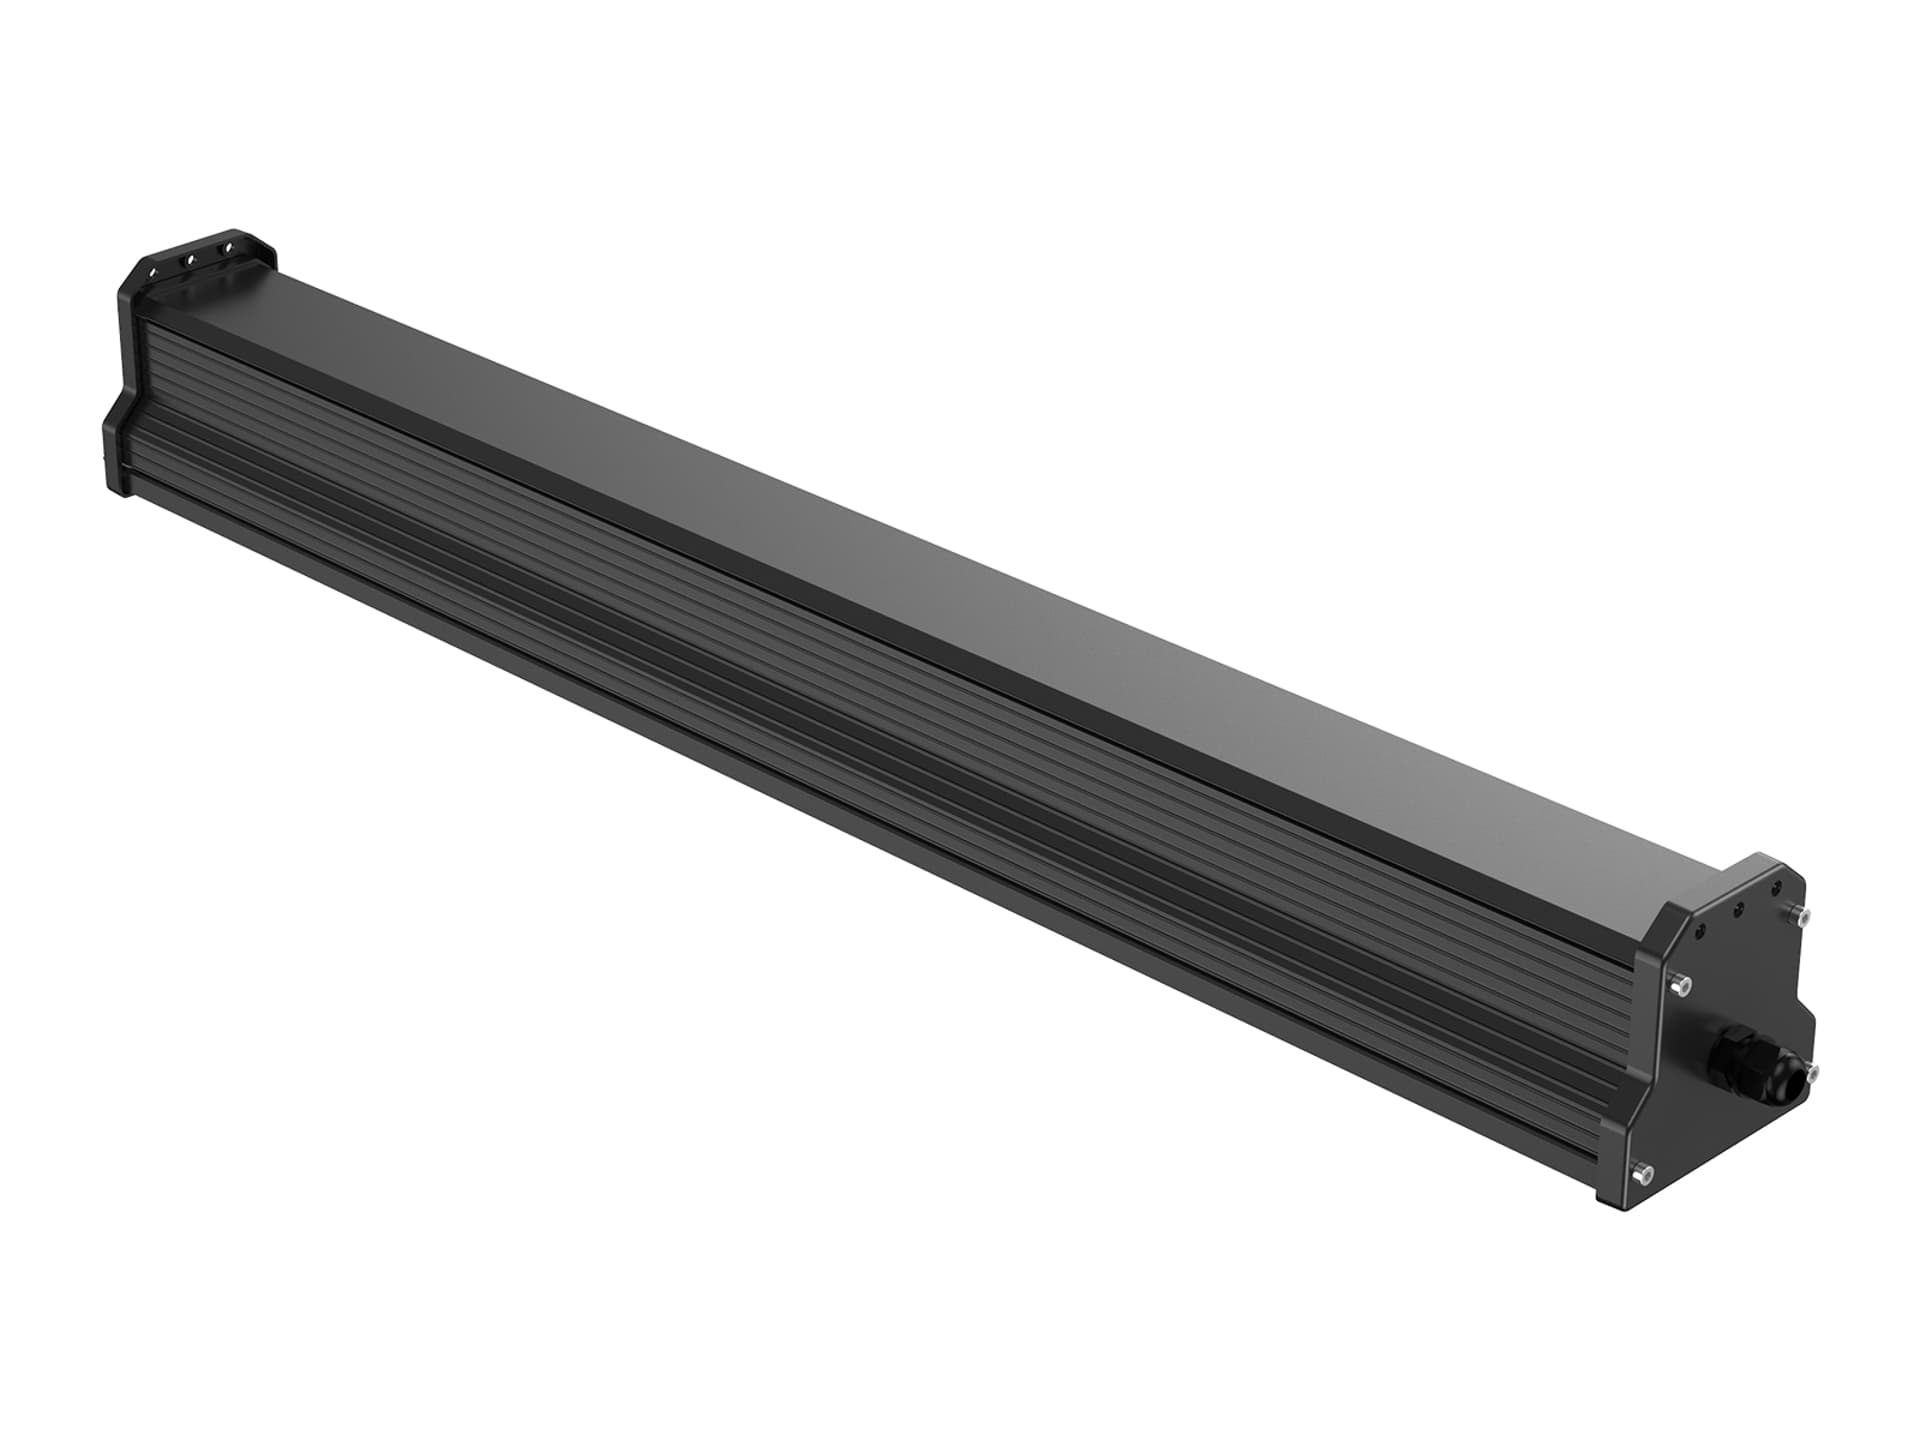 LHB42 LED Linear Light with Various beam angle